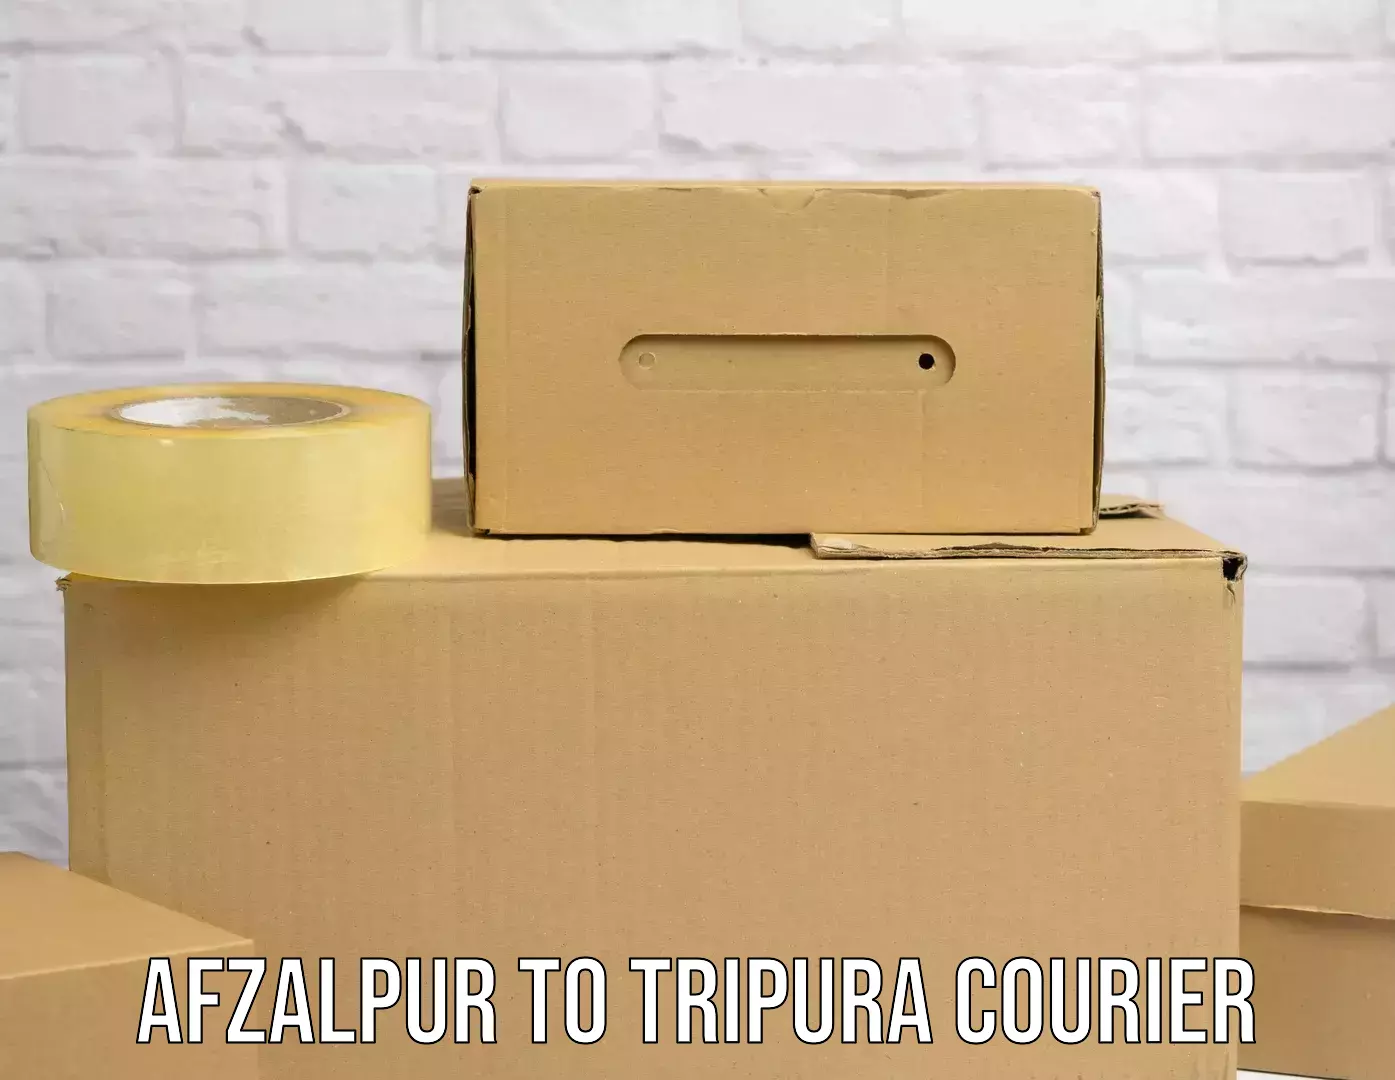 Next-day delivery options Afzalpur to Tripura